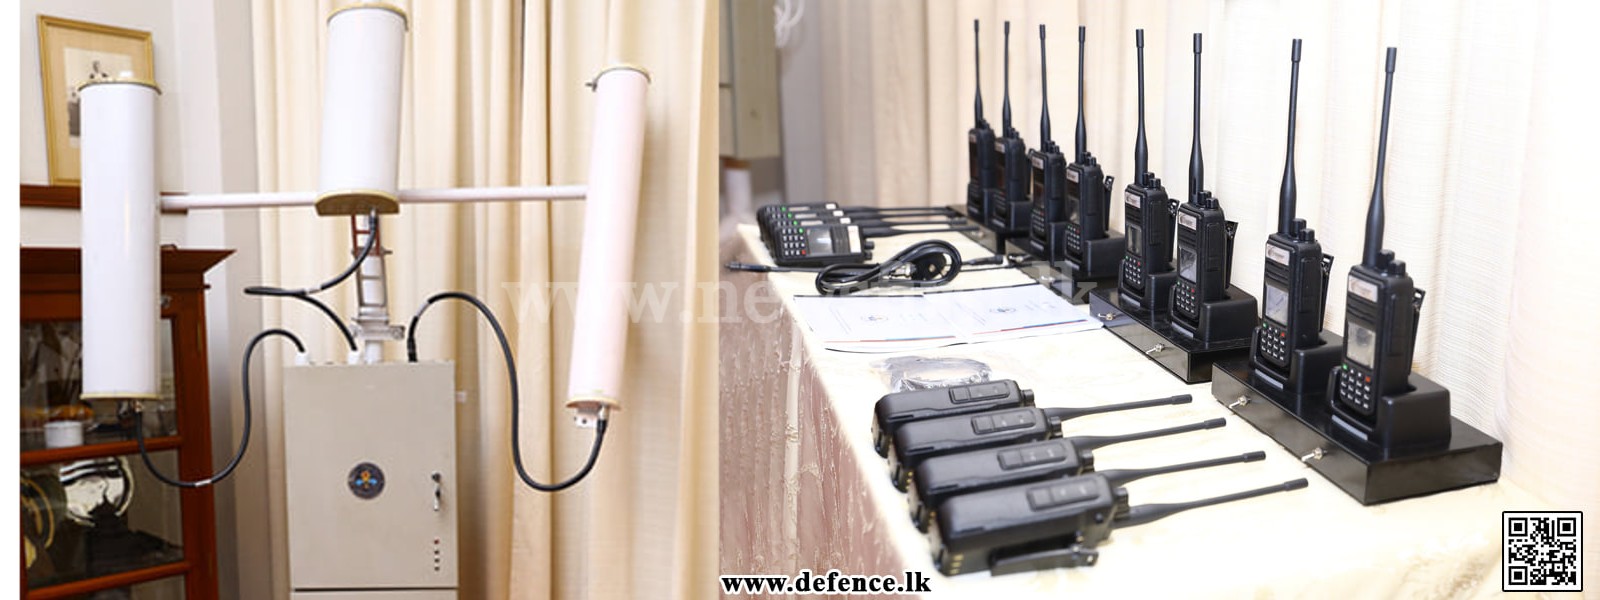 Locally produced security devices for Parliament security